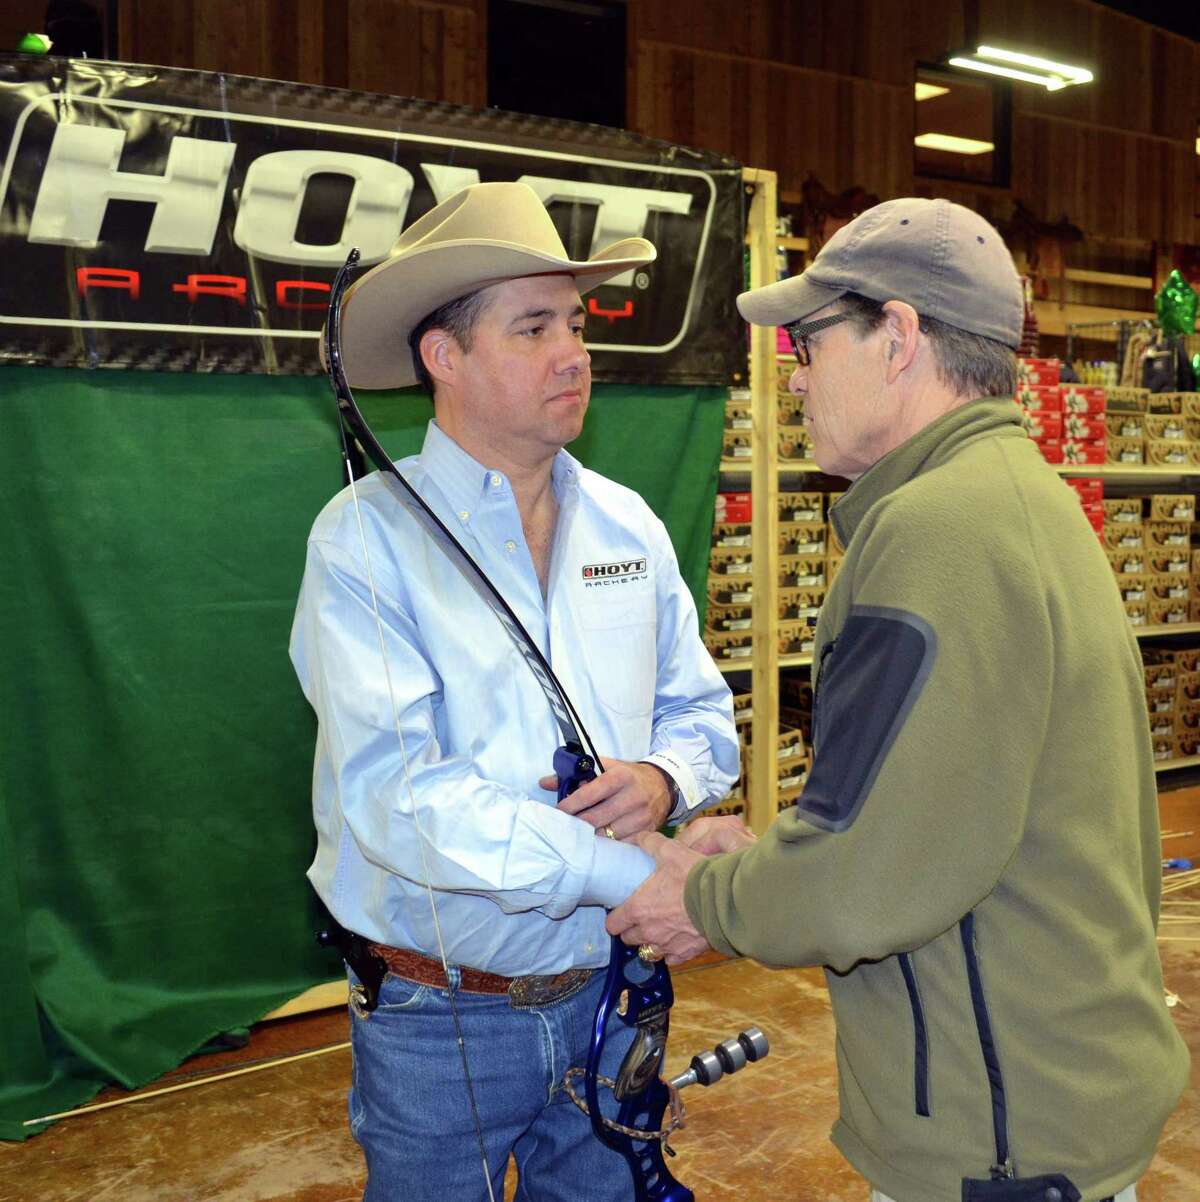 Former Gov. Rick Perry congratulates expert archer Frank Addington on his incredible skills and exchanges some bow hunting experiences with the bowman following a performance at Wheeler’s Feed and Outfitter’s in Boerne.